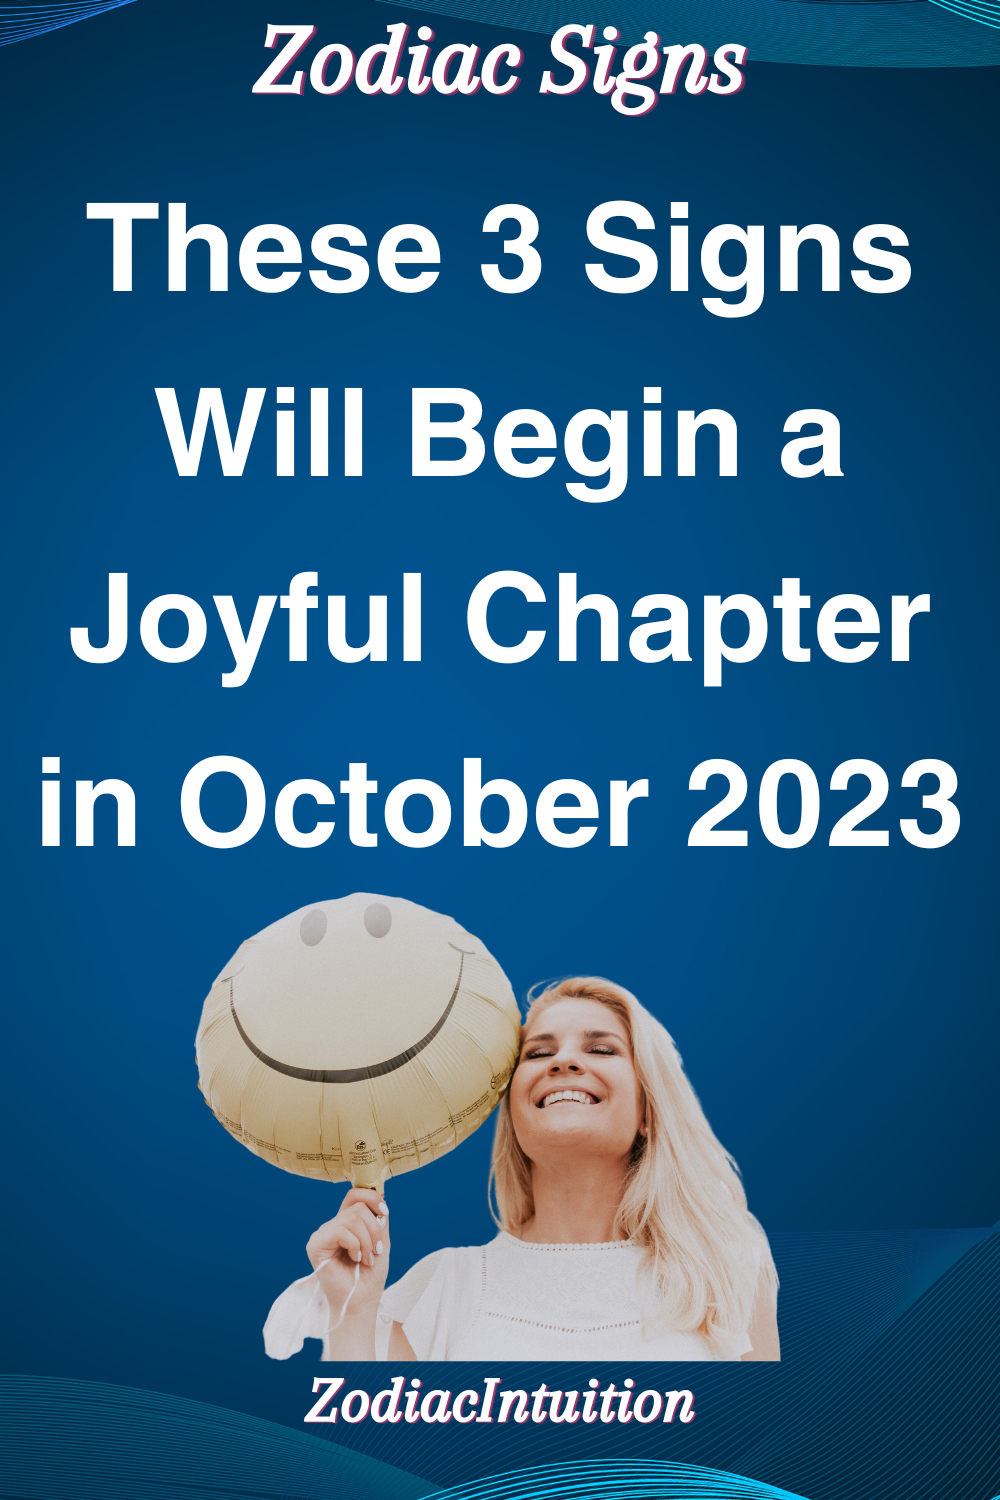 These 3 Signs Will Begin a Joyful Chapter in October 2023